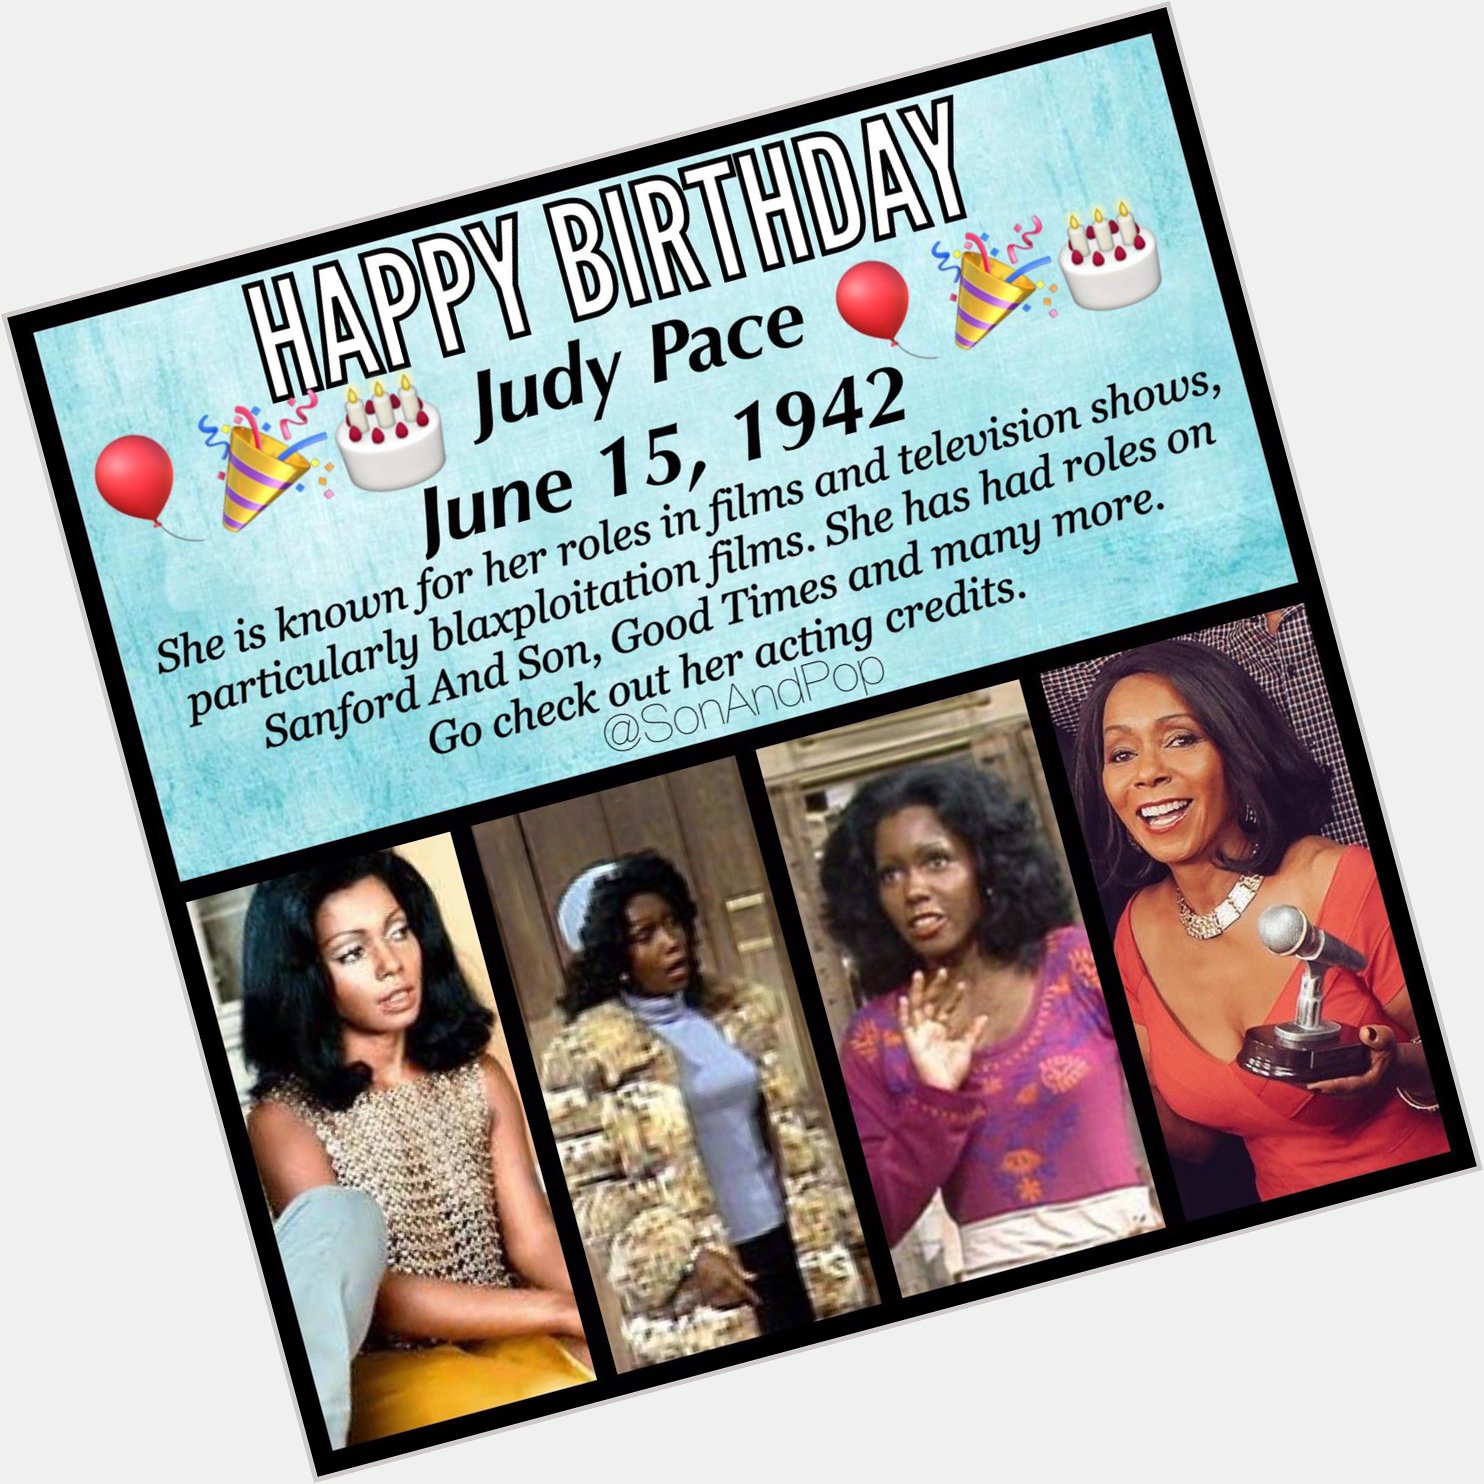 Happy Birthday to actress Judy Pace 